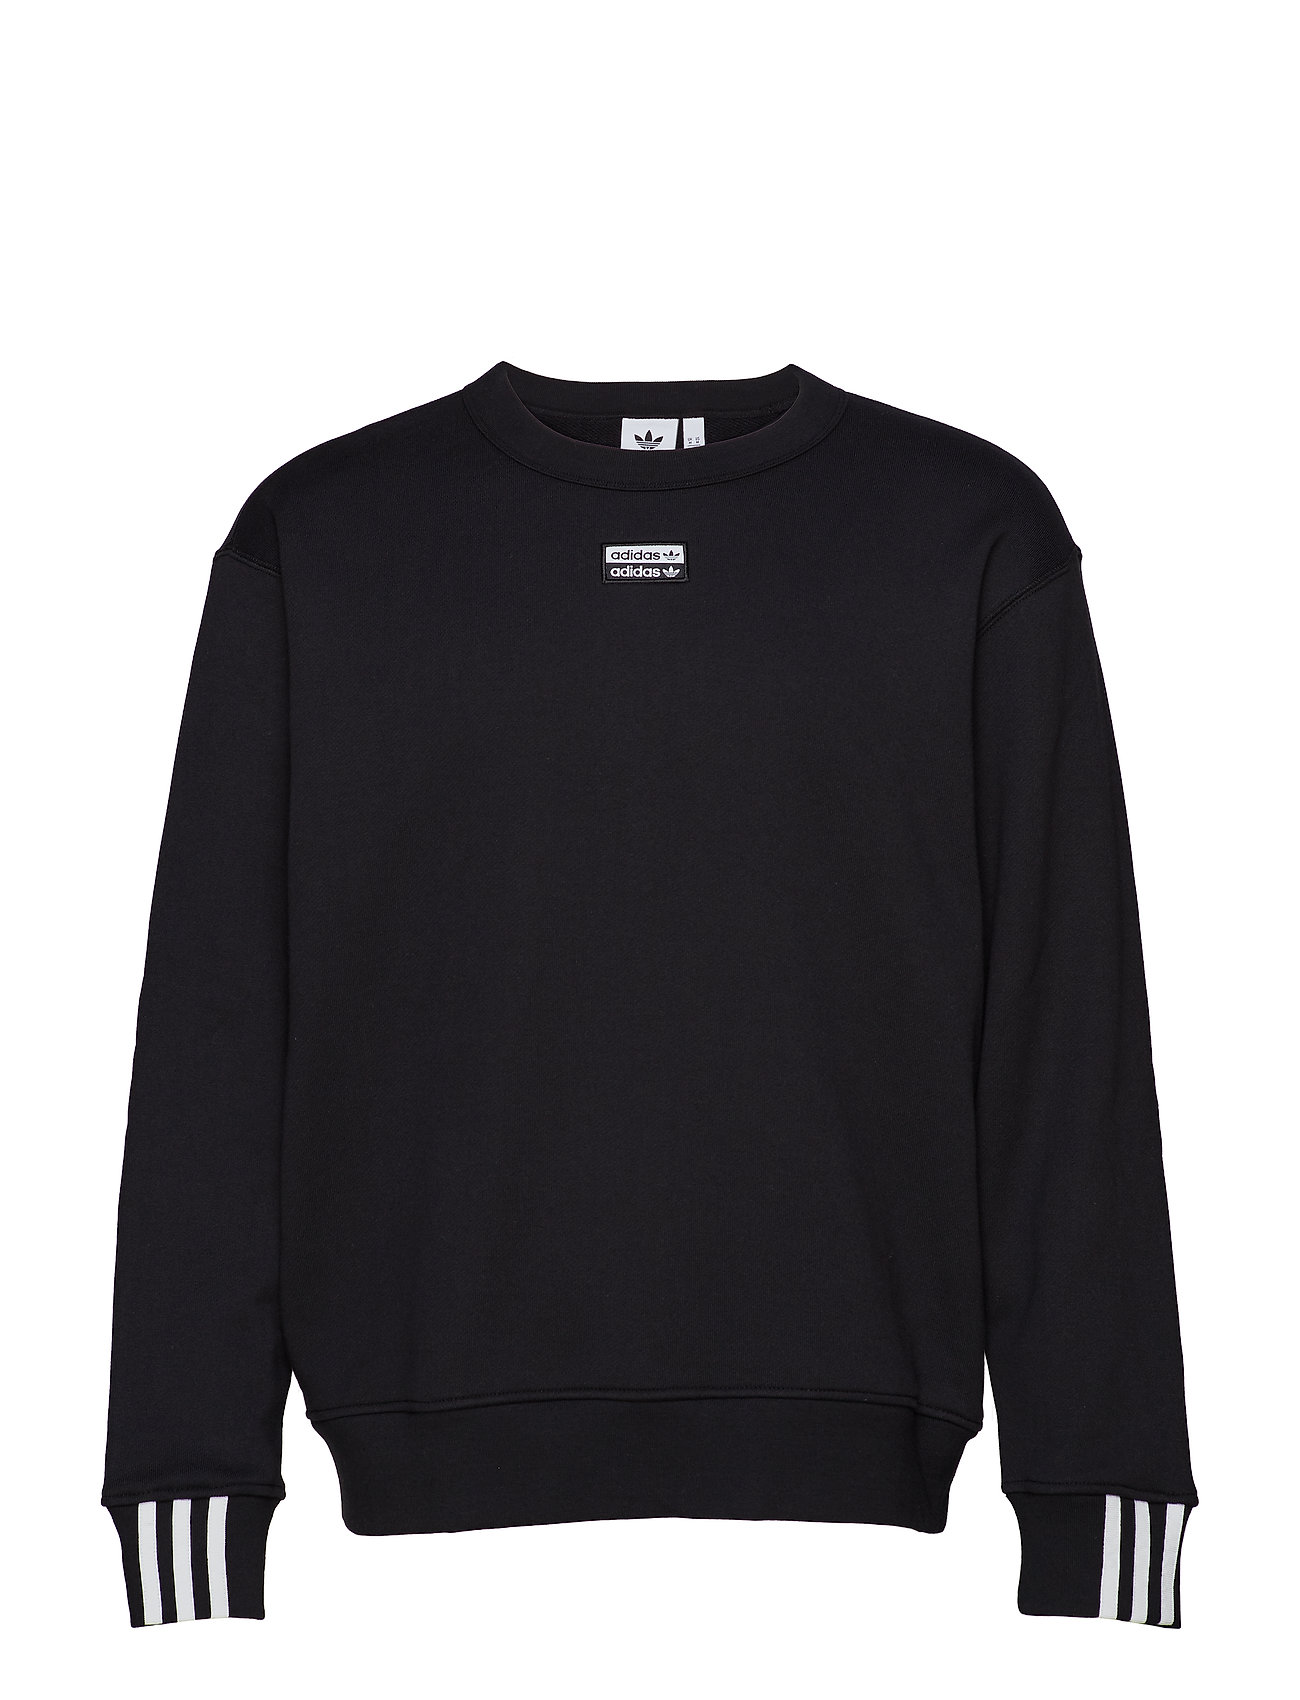 adidas Originals Vocal Crew (Black), (41.21 €) | Large selection of  outlet-styles | Booztlet.com